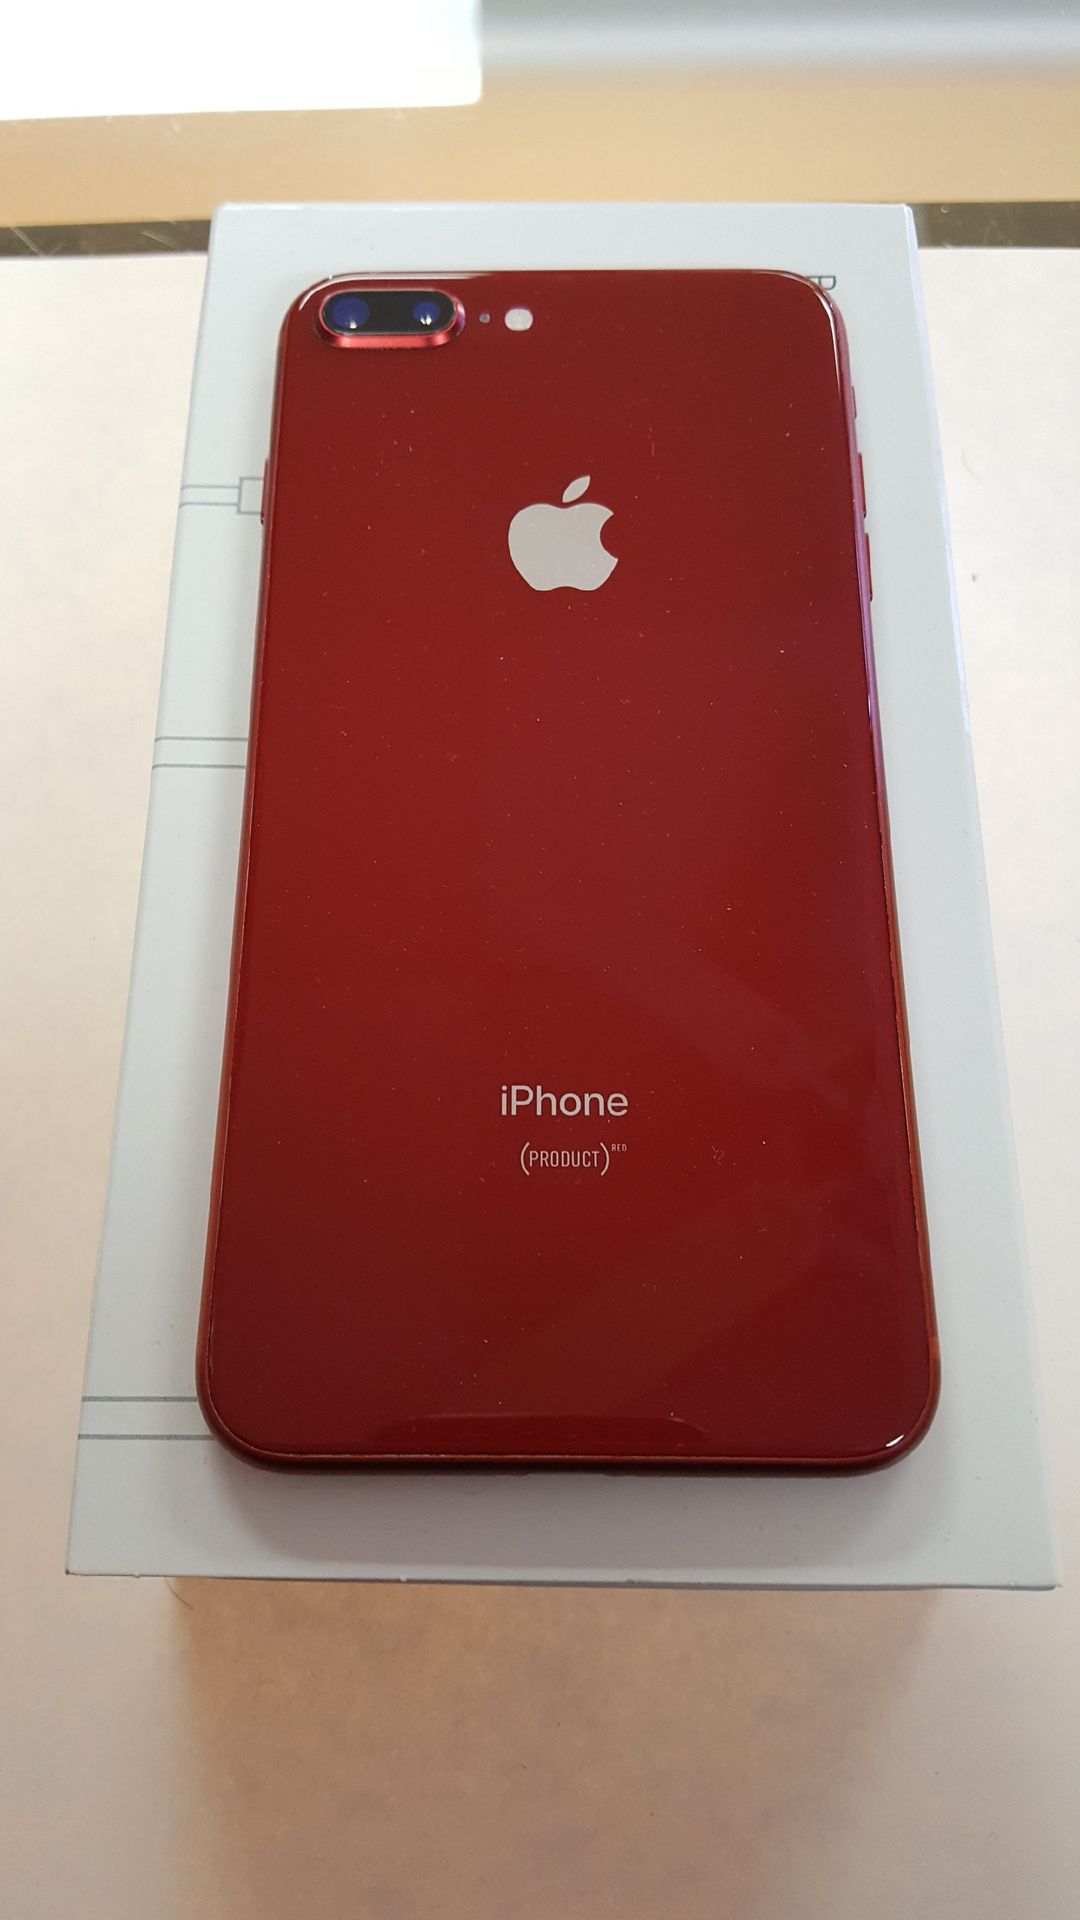 iPhone 8 Plus 64gb pre owned great condition for boost mobile only 9/10 condition fully functional RED!